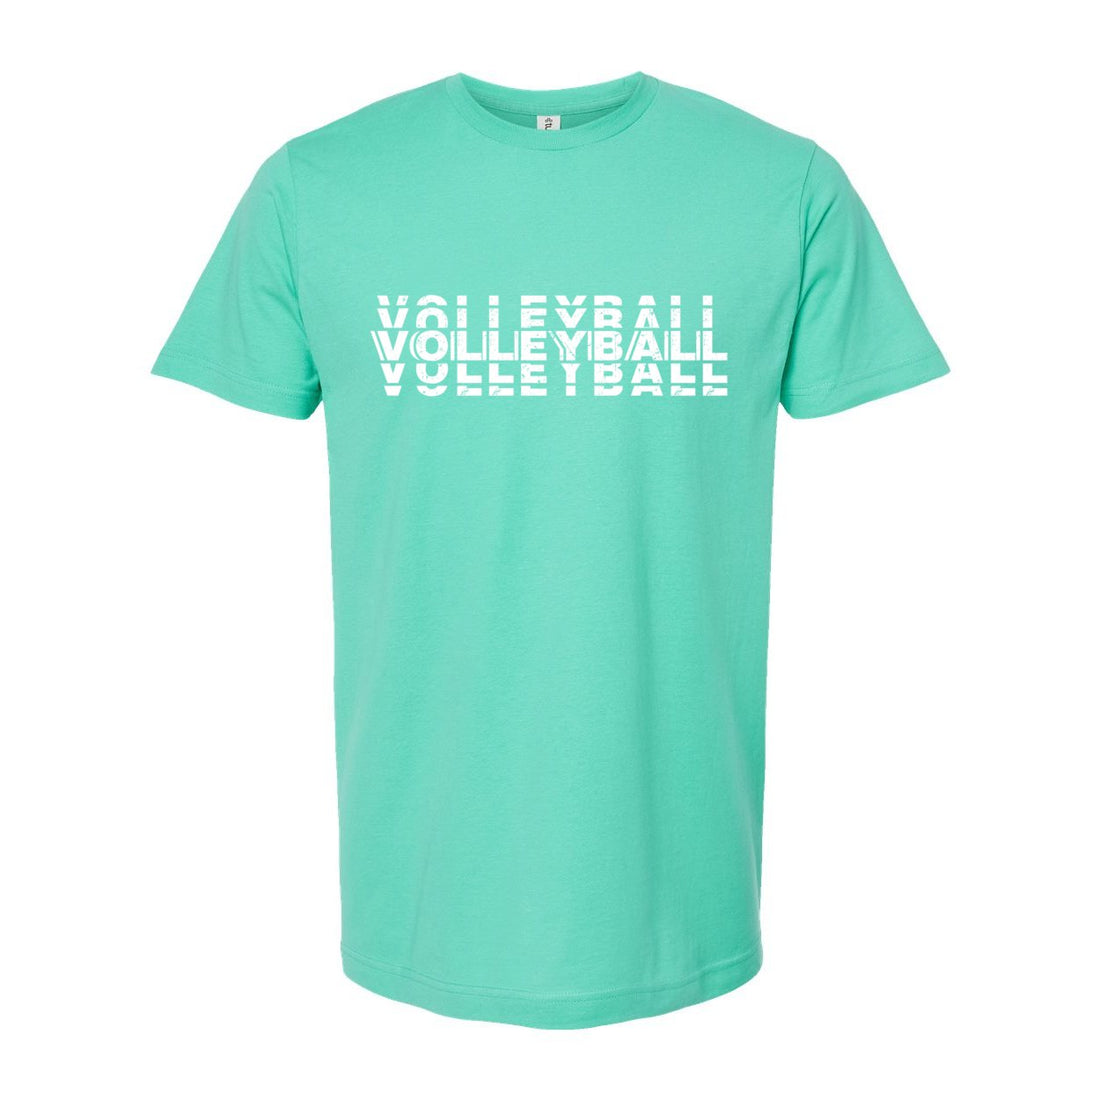 Volleyball Repeat Unisex Fine Jersey T-Shirt - T-Shirts - Positively Sassy - Volleyball Repeat Unisex Fine Jersey T-Shirt